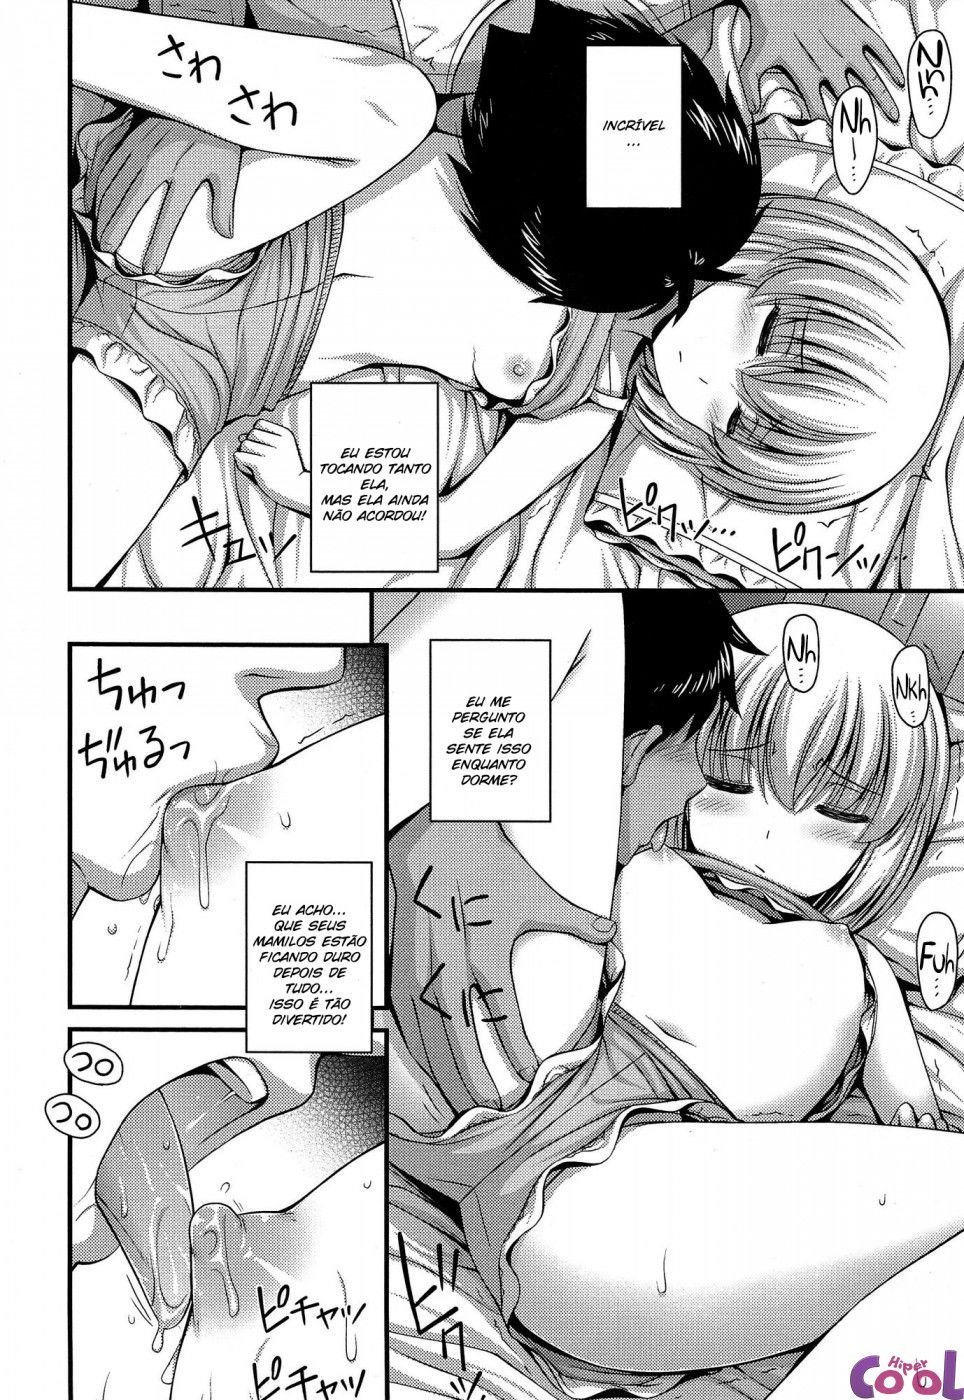 nemui-hime-chapter-01-page-08.jpg